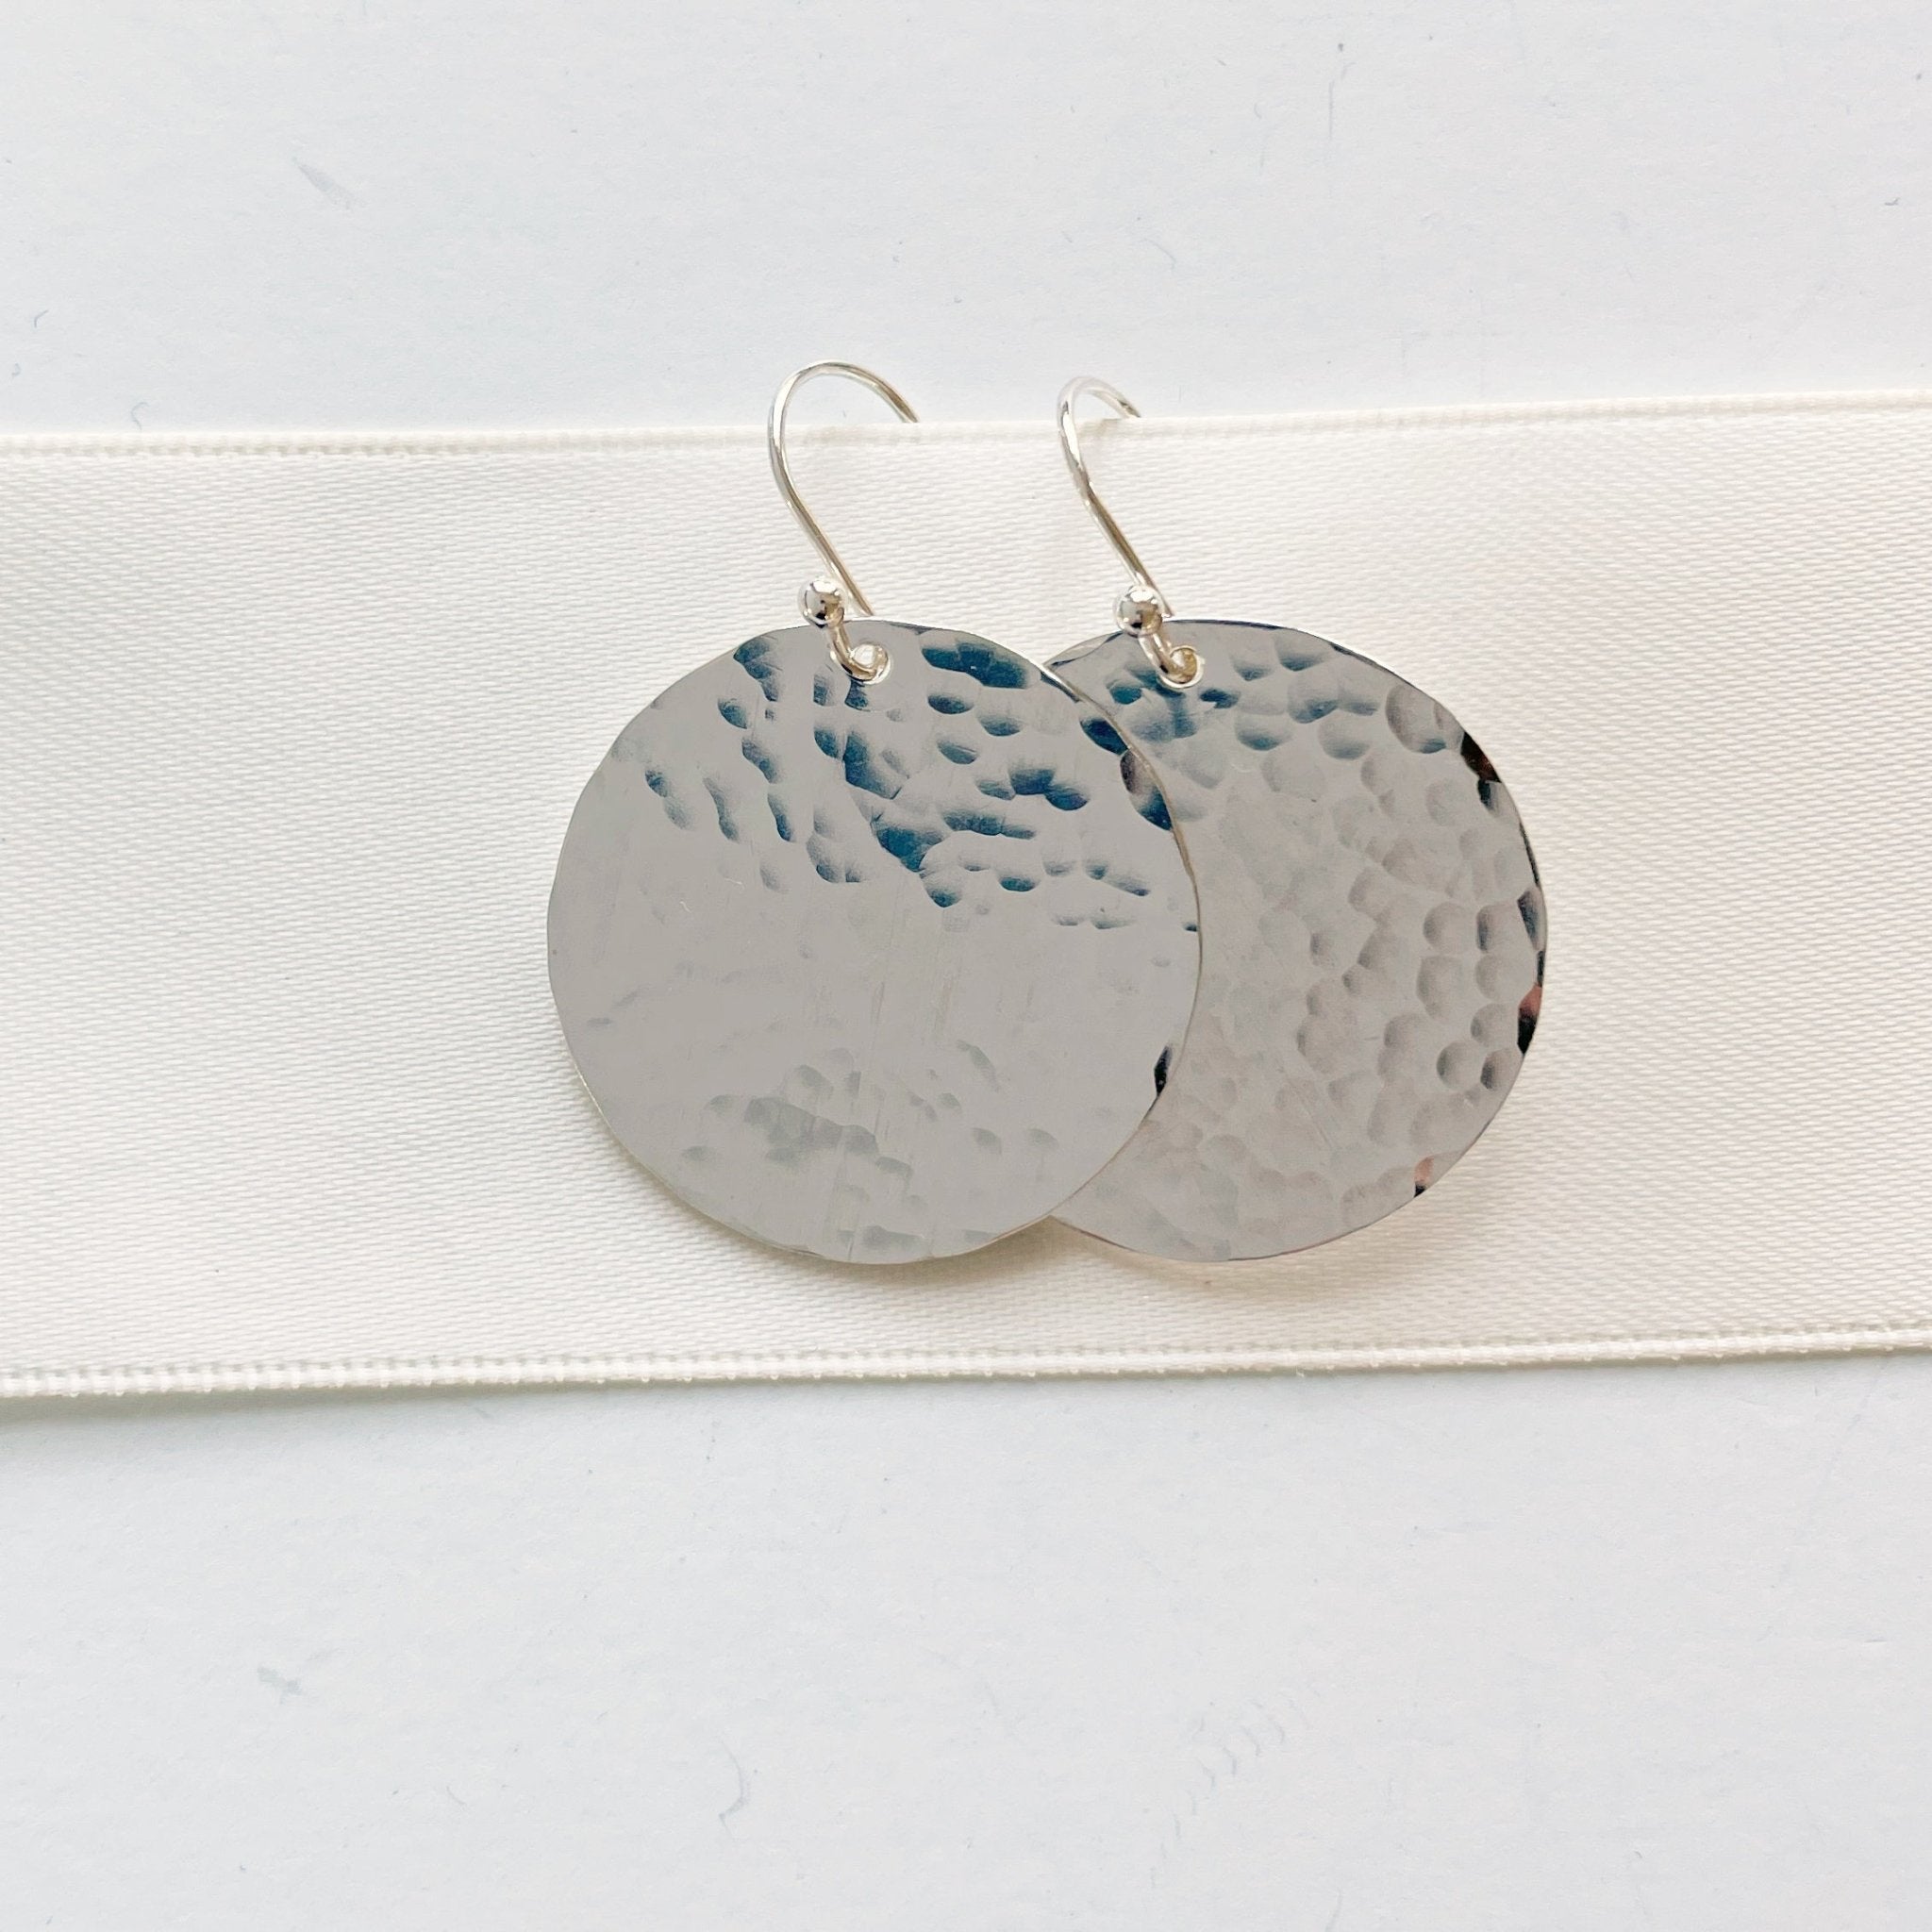 Silver Buffay Earrings by Sarah Cornwell Jewelry. Lightweight, shimmery, textured 1 inch silver disc earrings on a white background.